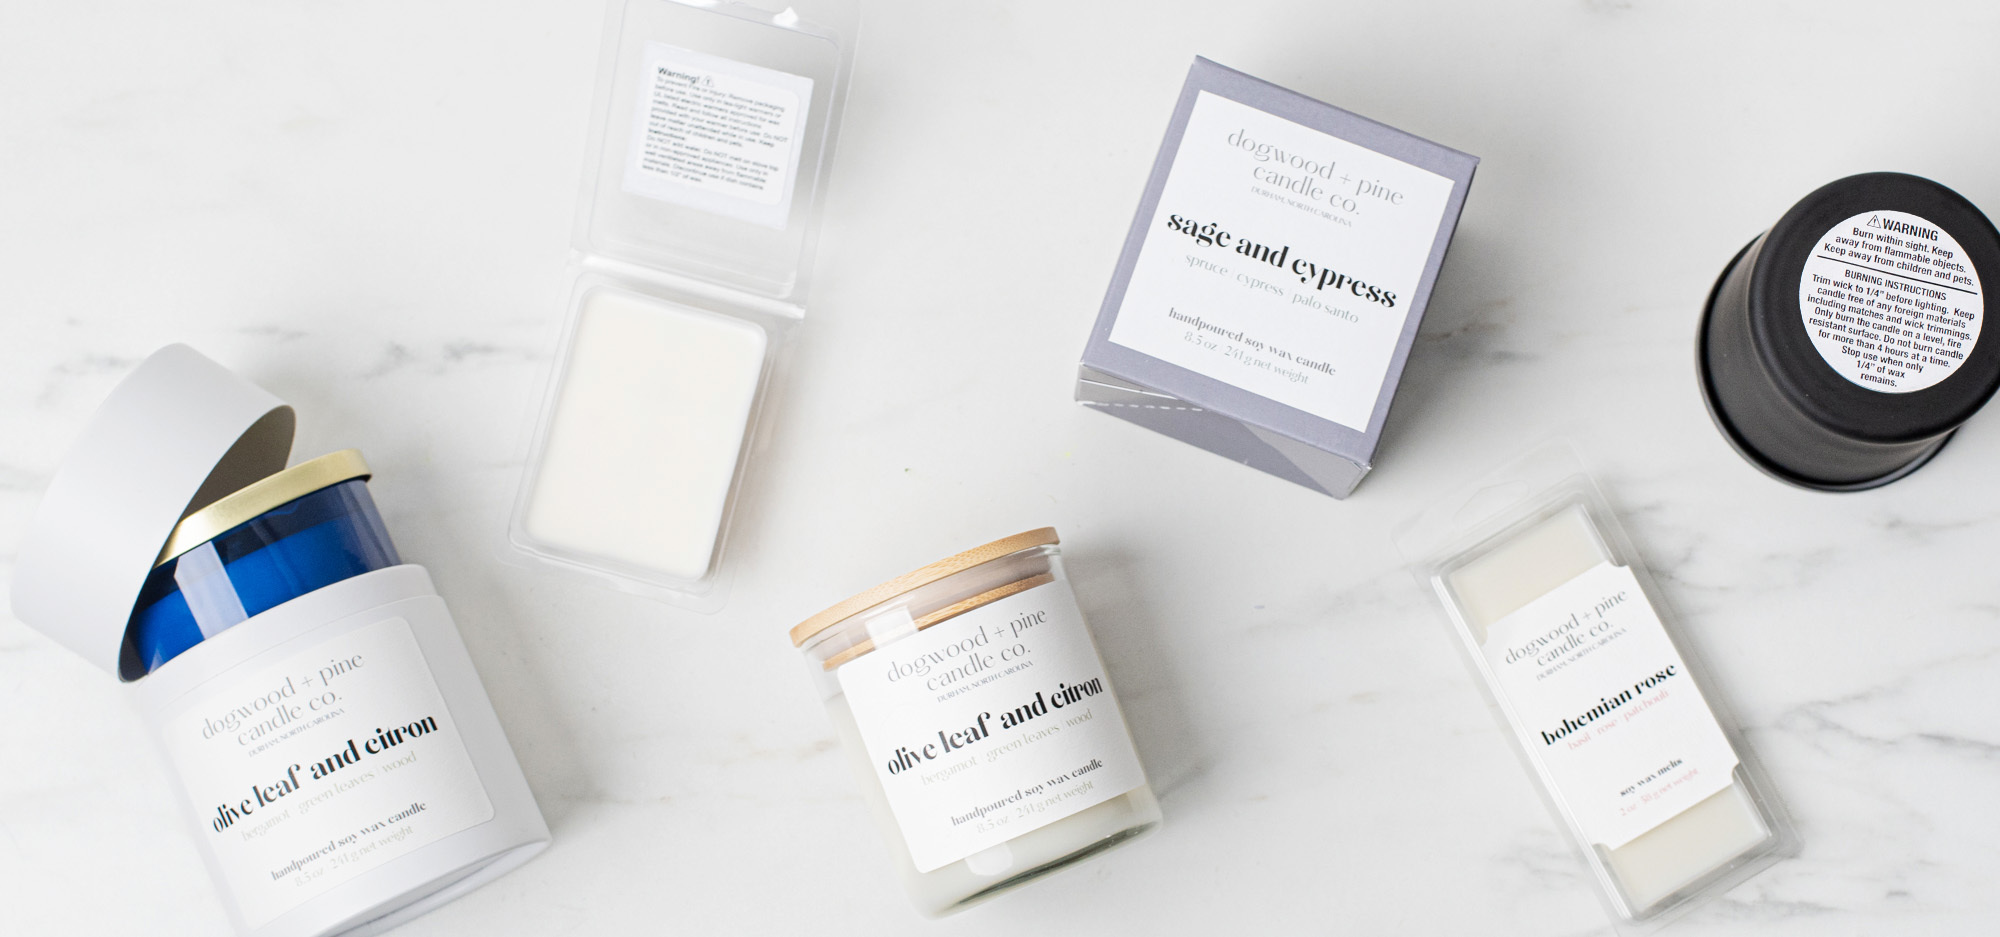 An assortment of candles and wax melts featuring examples of product labels and warning labels arranged in a flatlay on a white marble surface.